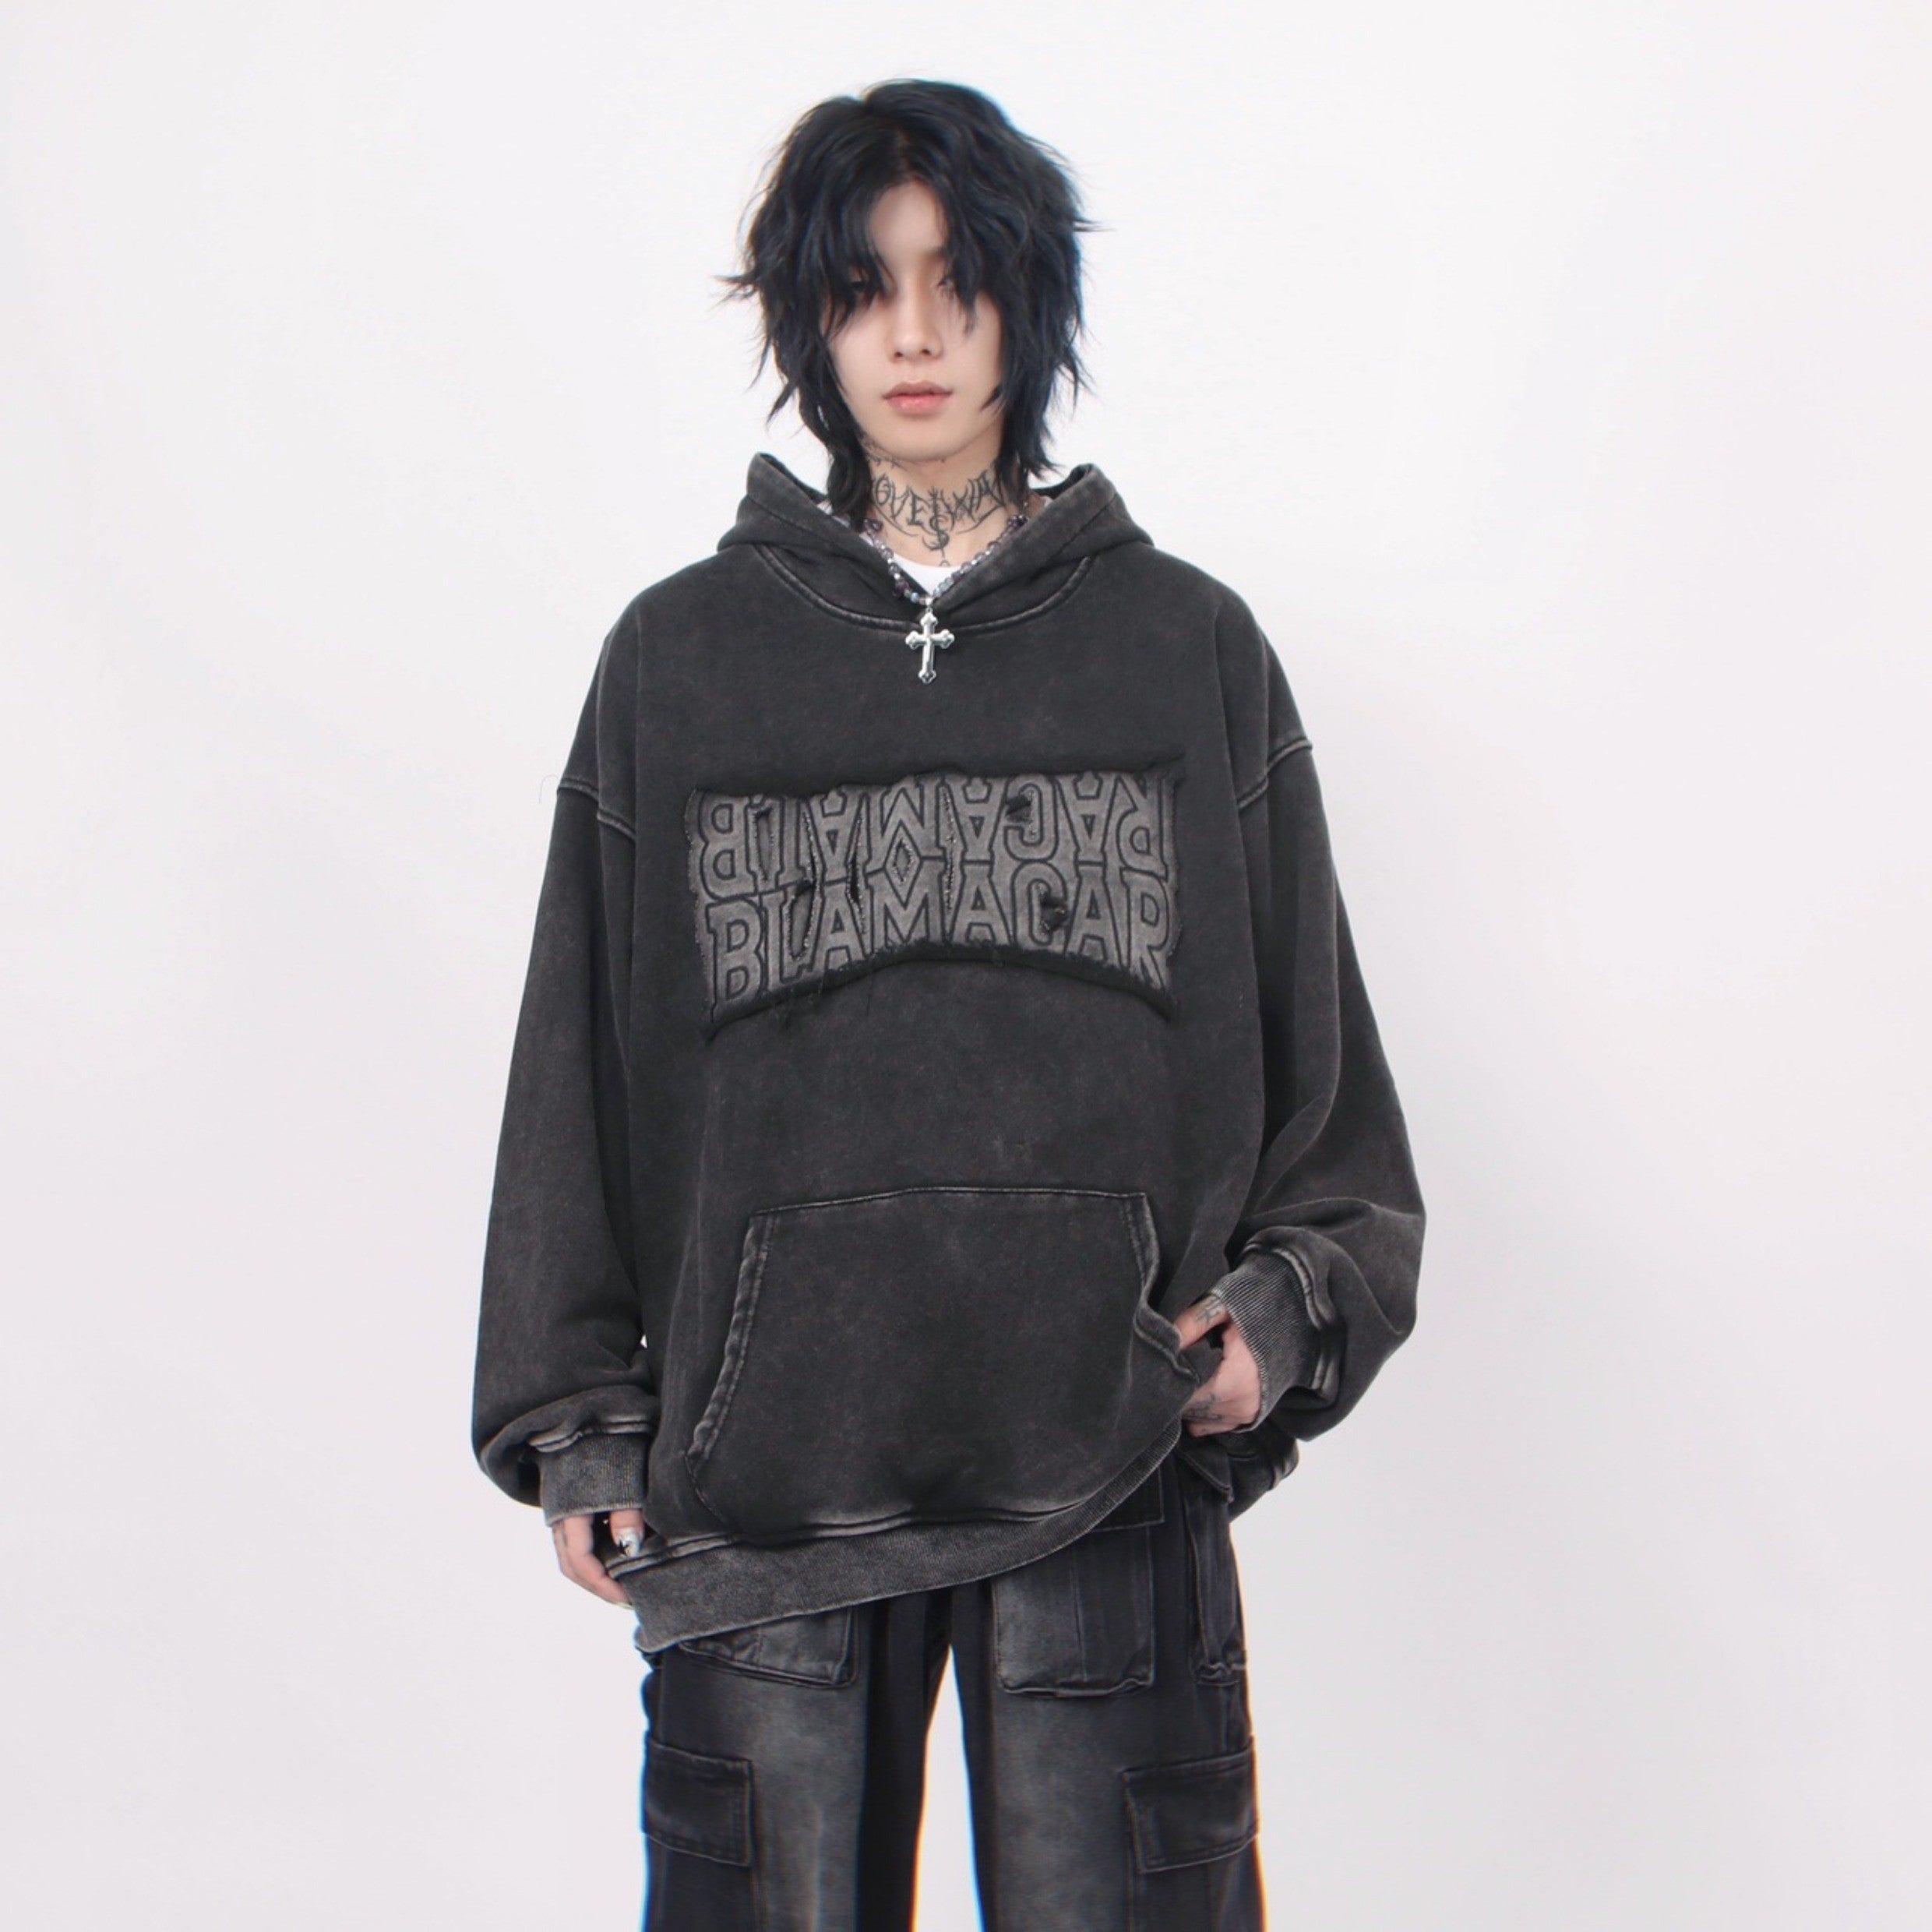 challenger【Fucking Awesome】CUT OUT LOGO HOODIE